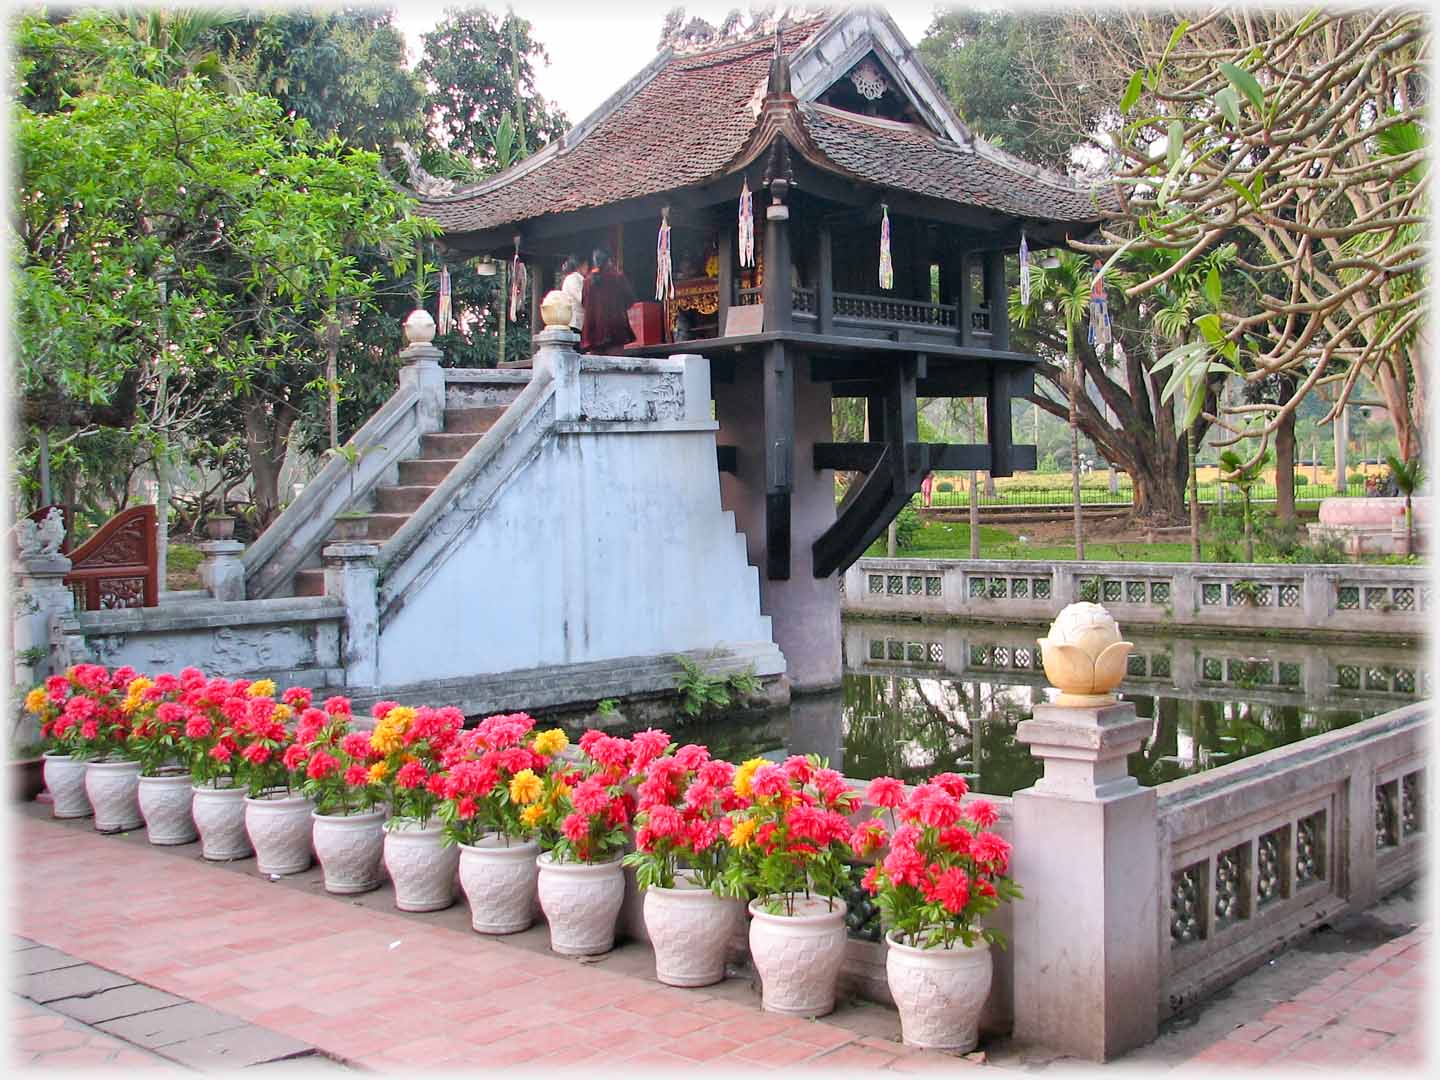 Flowers in front of balustrade round pool in which is the pagoda on column.